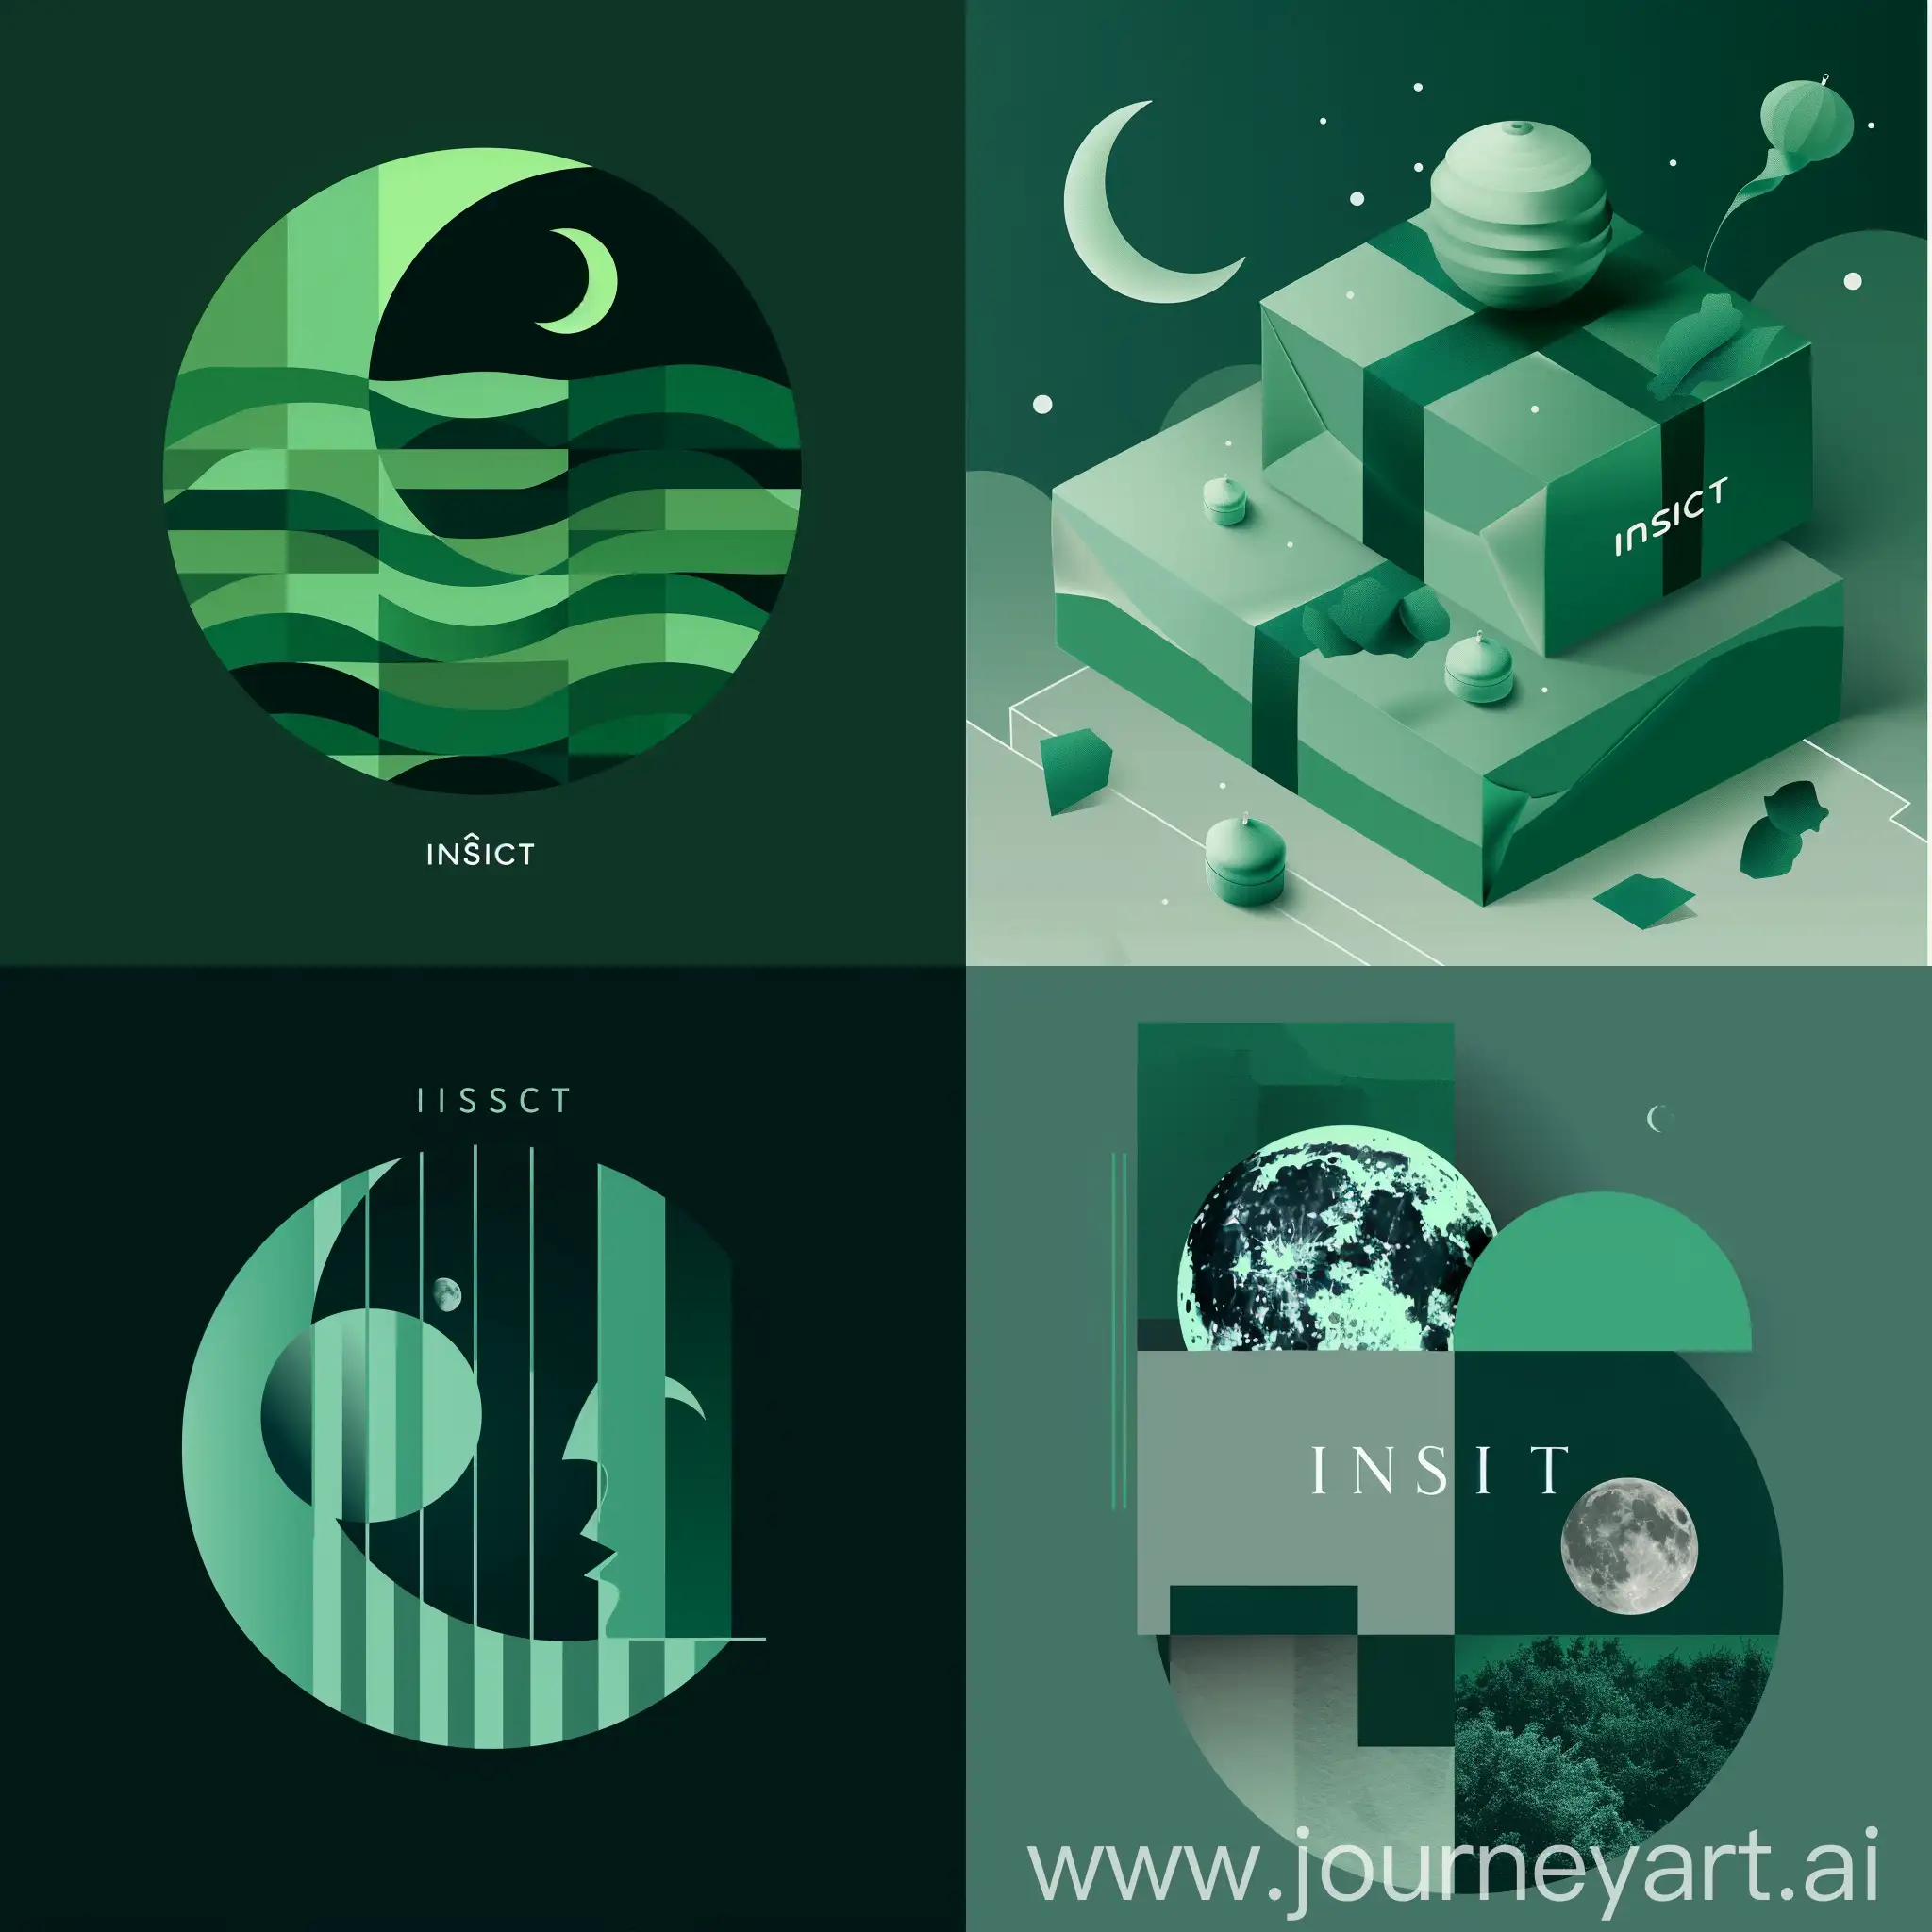 logo to a gift package called "insight" in shades of green in modern style with moon